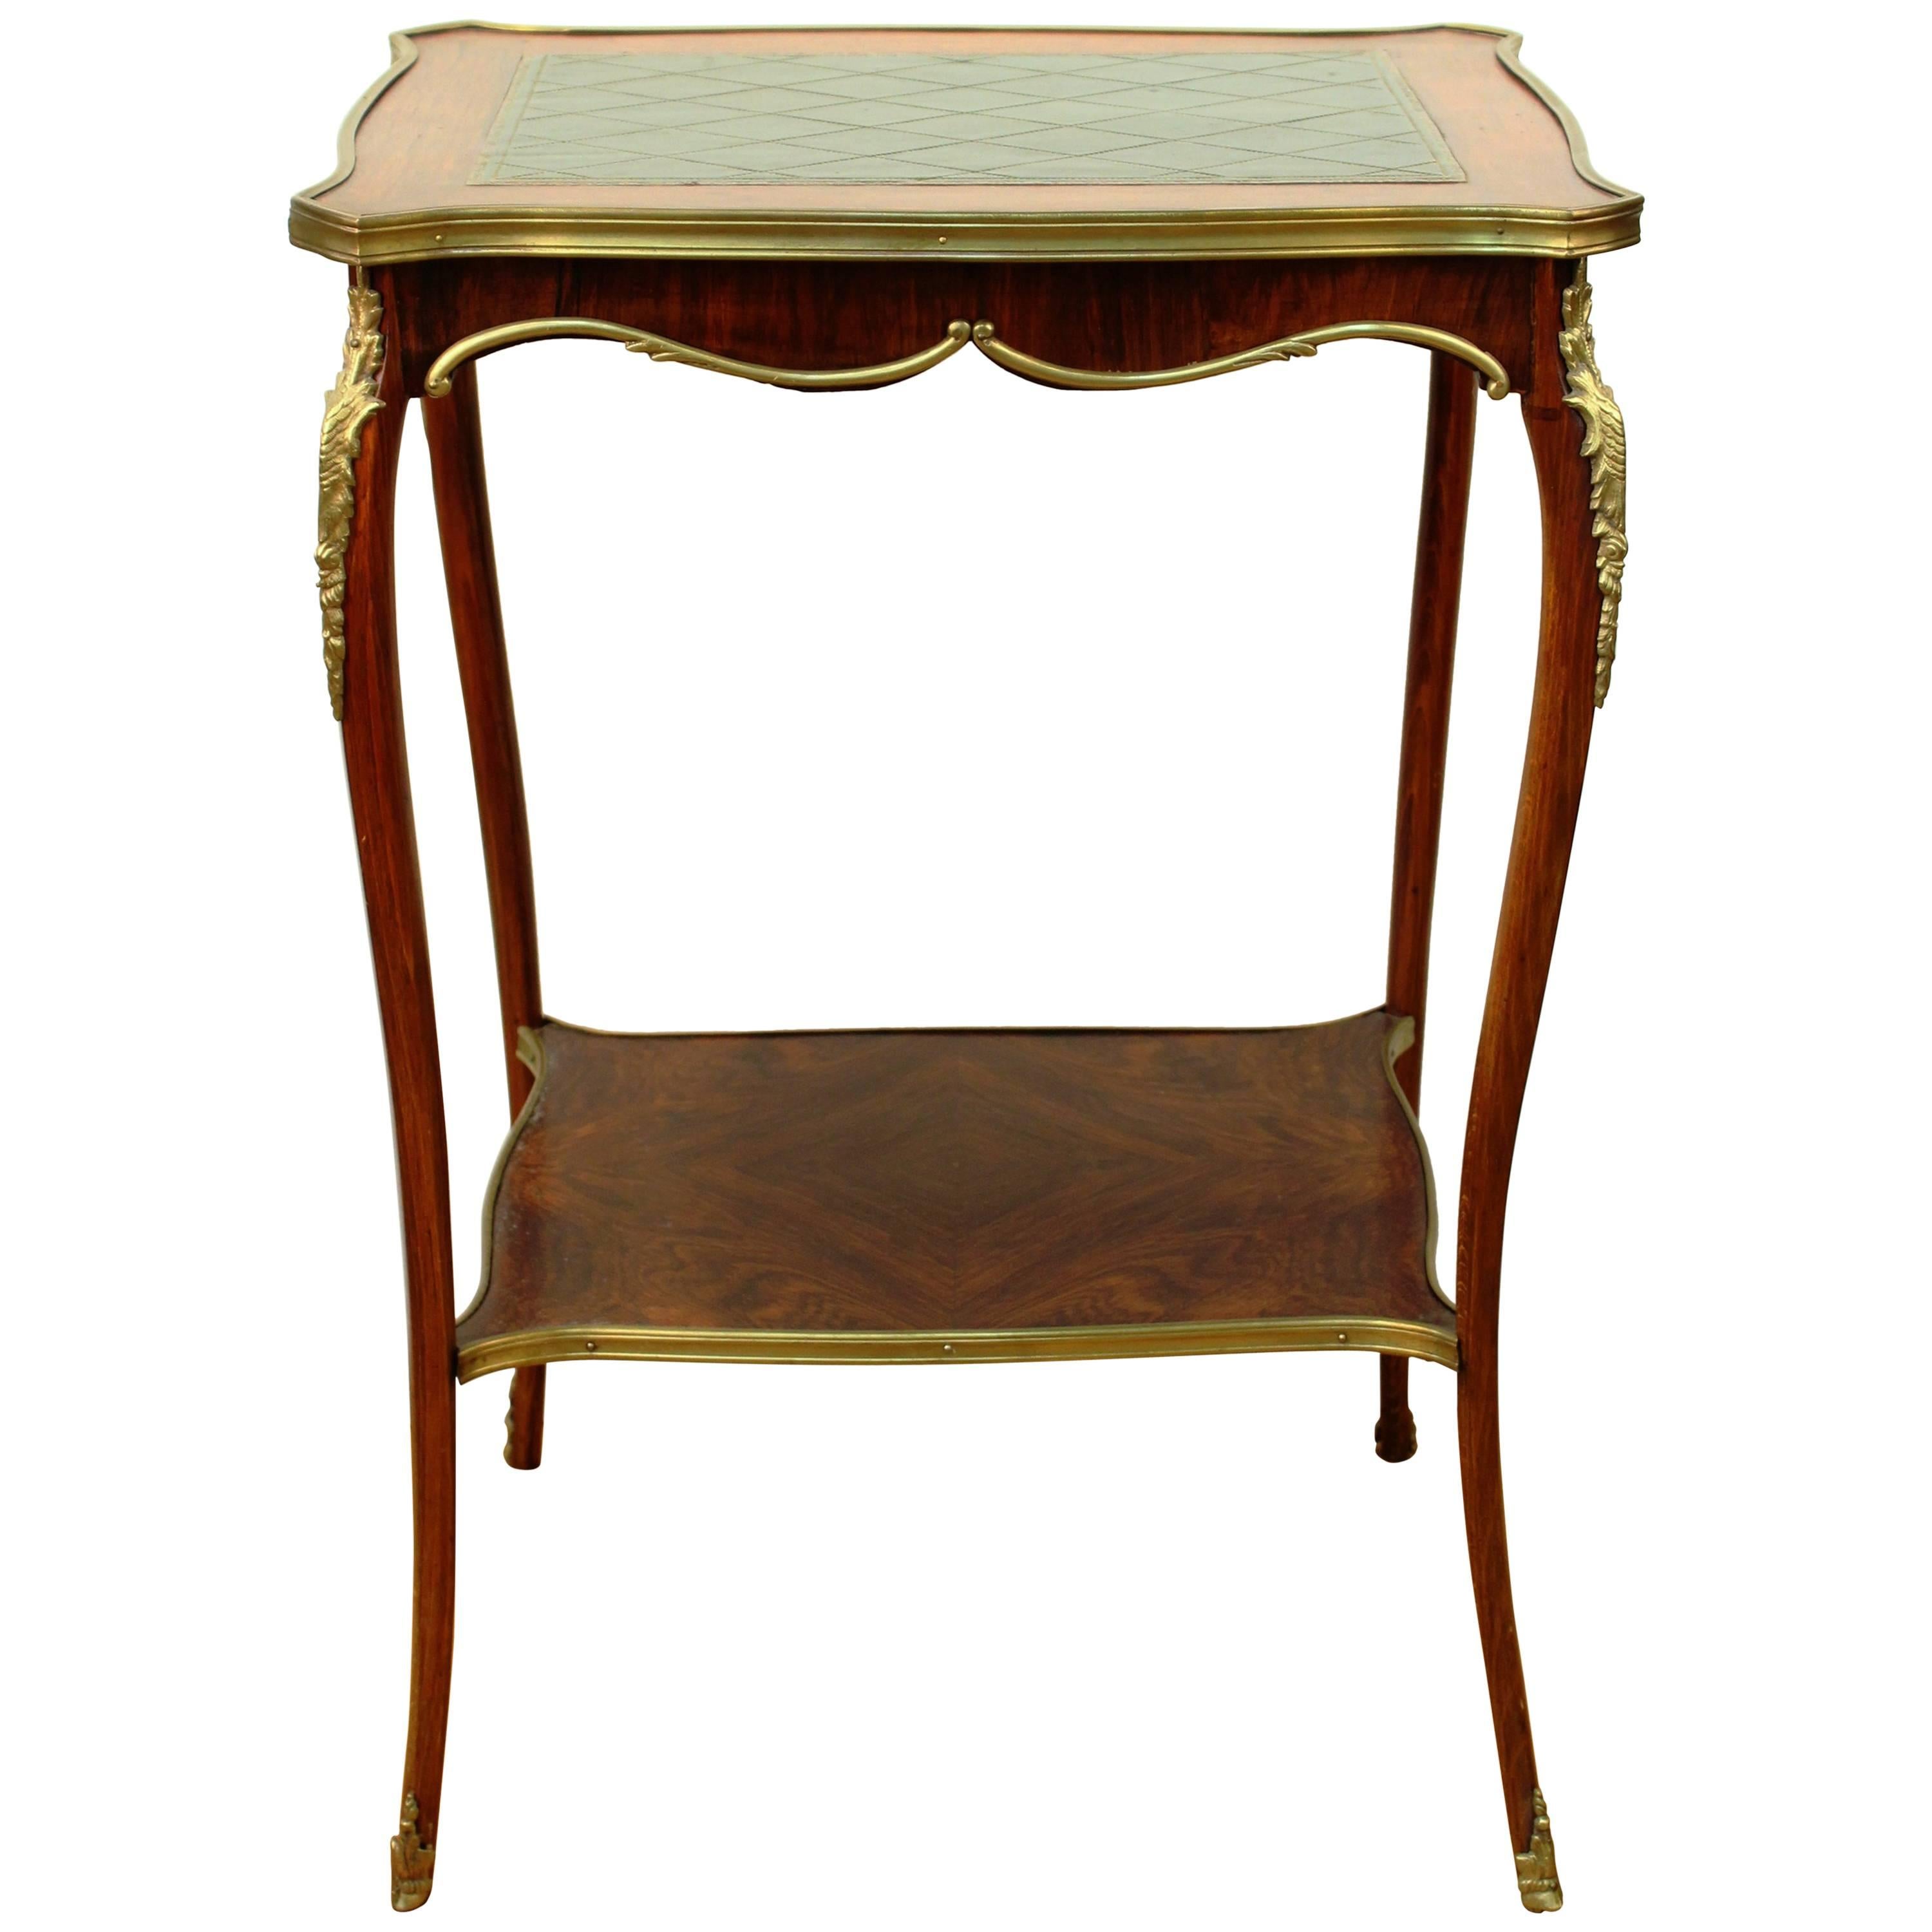 19th Century Wooden Side Table with Shelf and Green Leather Top